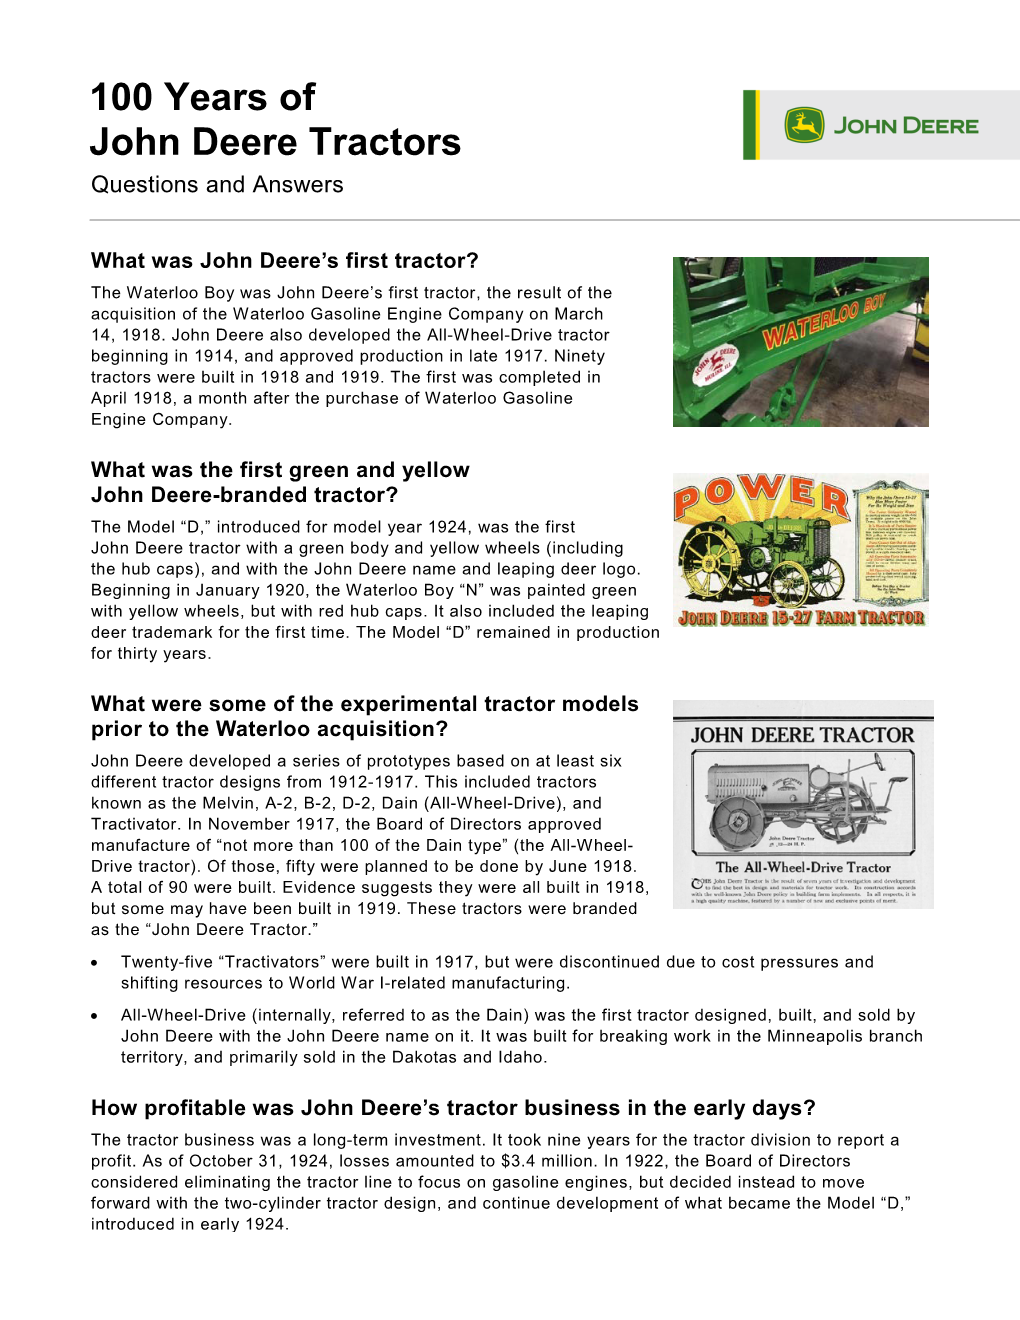 100 Years of John Deere Tractors Questions and Answers